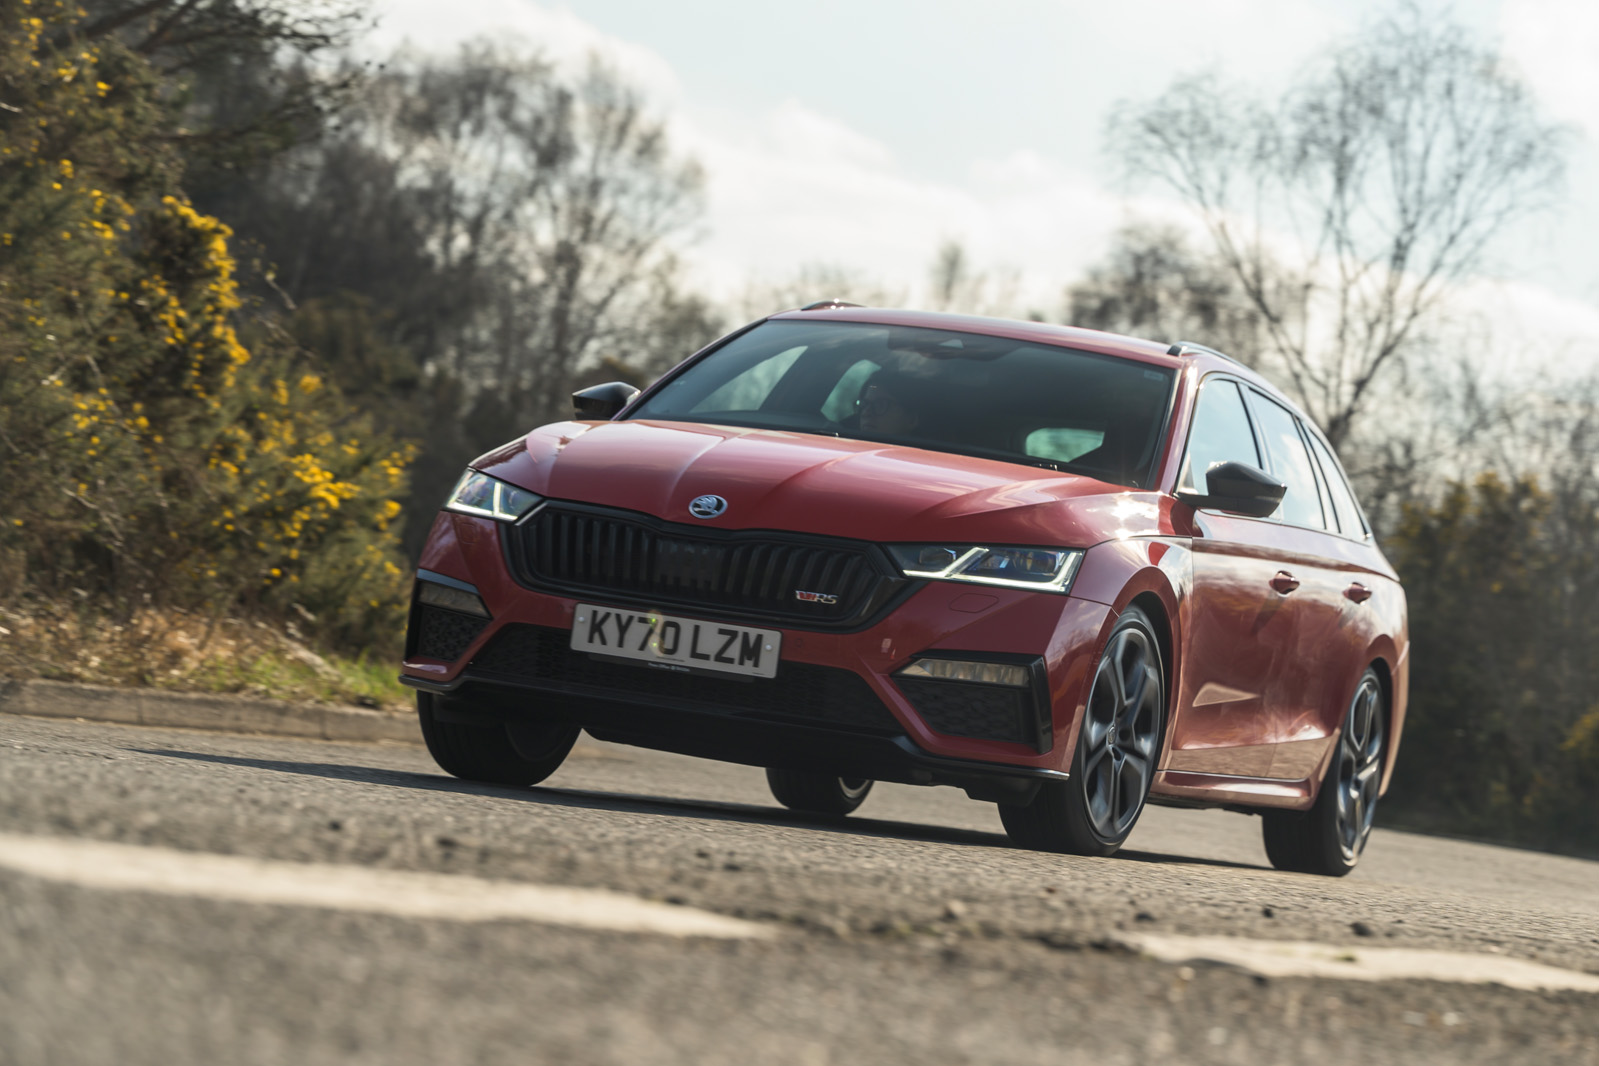 2021 Skoda Octavia RS 245 Subjected to Acceleration Test on the